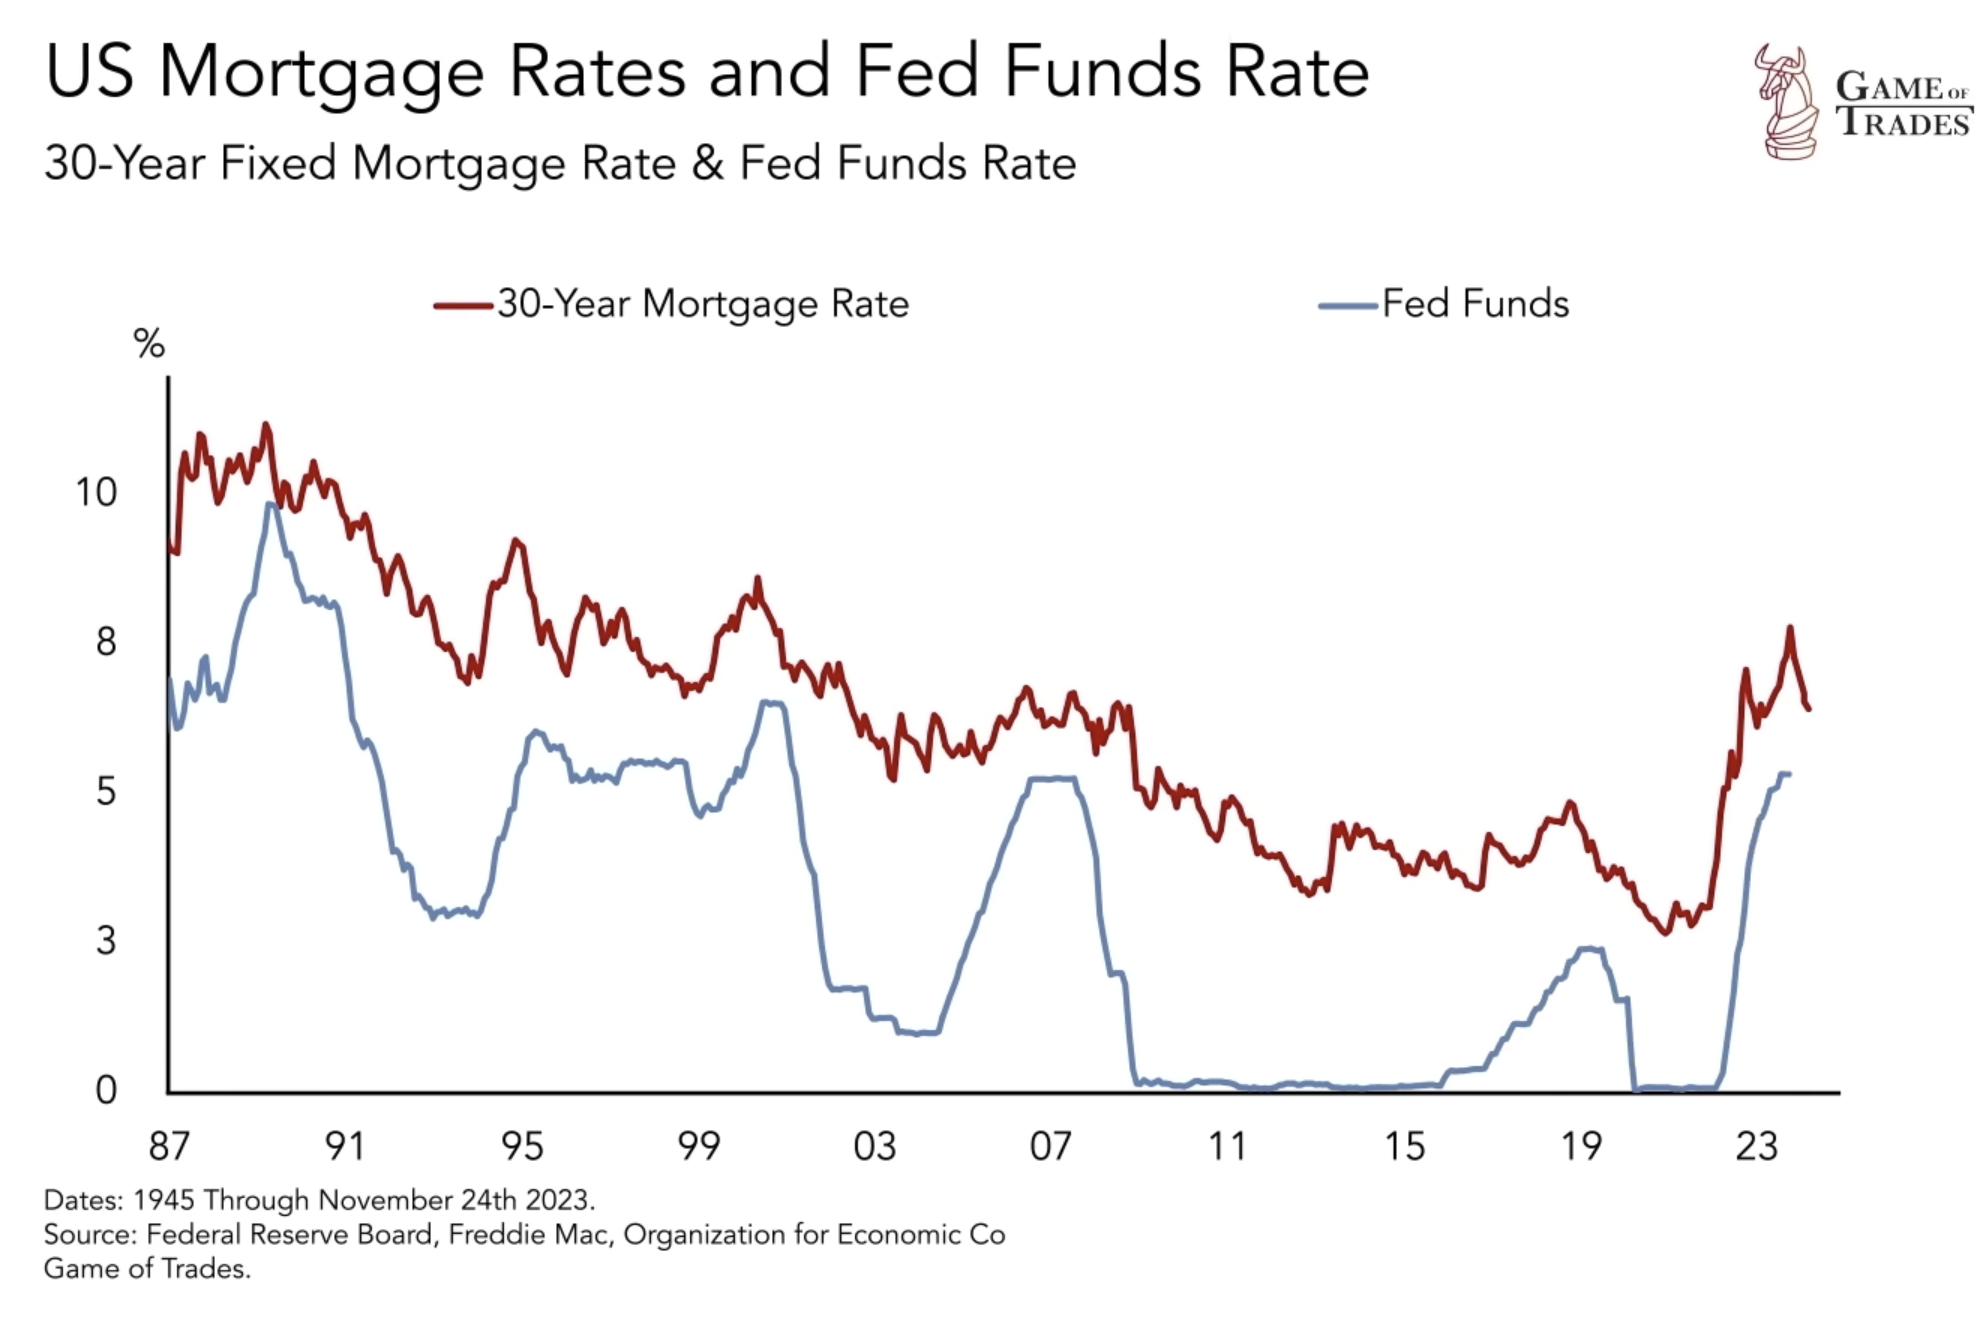 US Mortgage rates